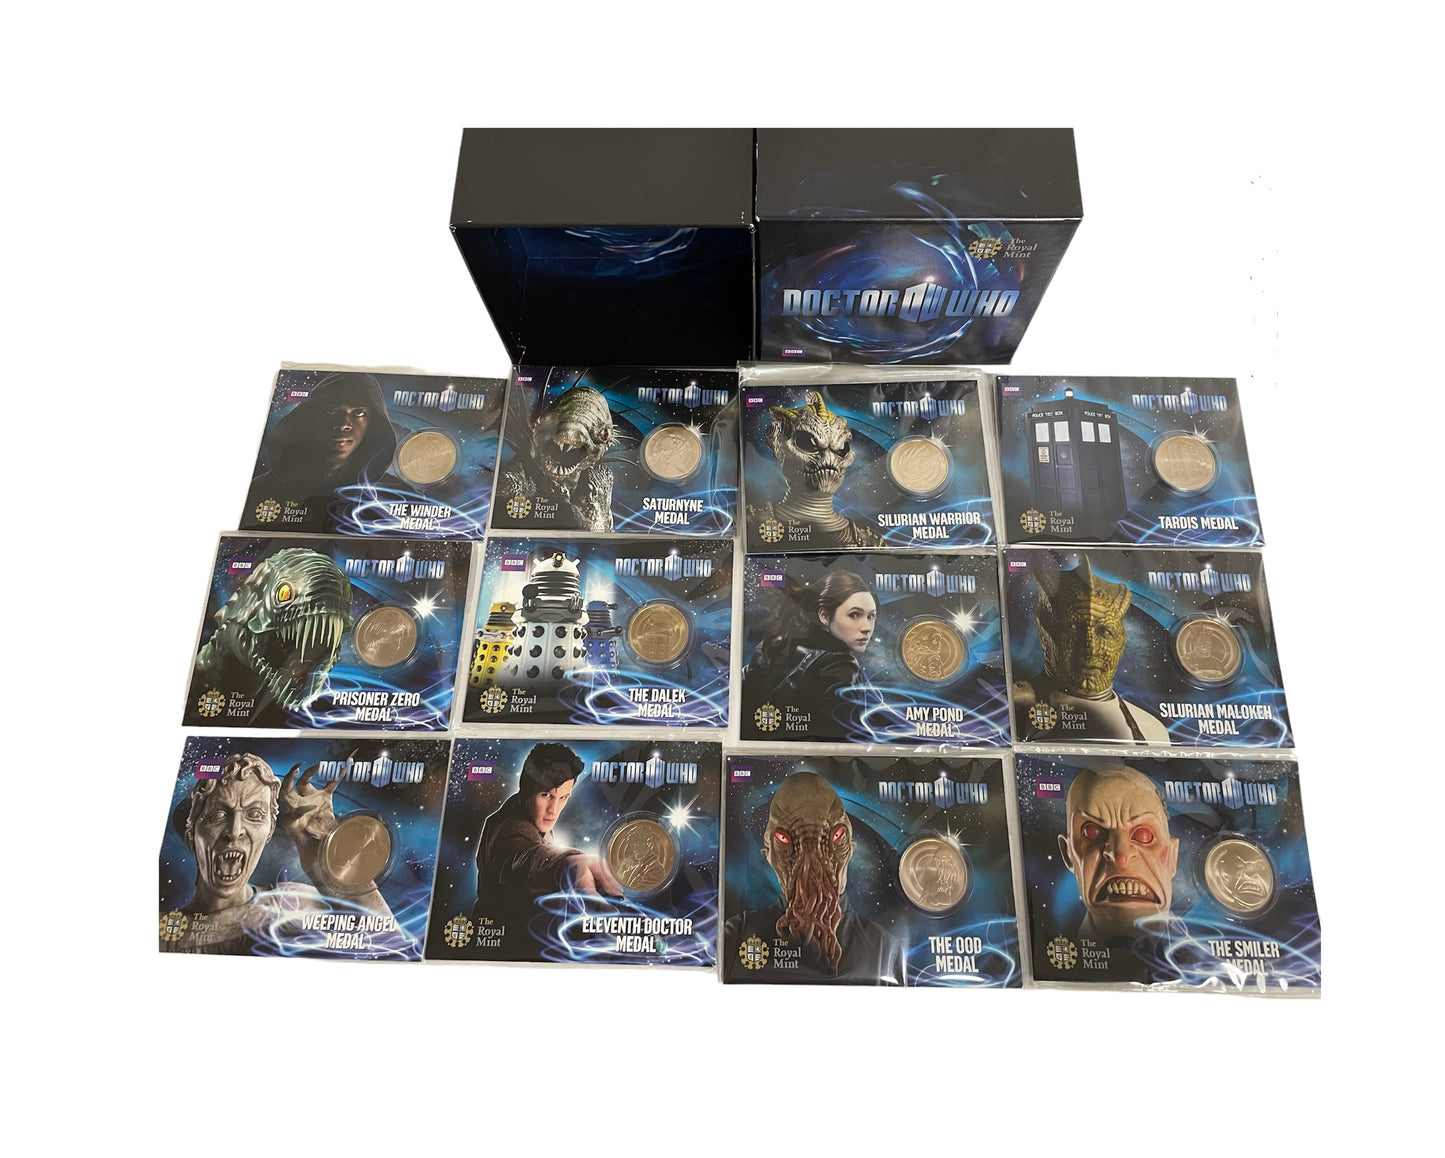 Vintage 2010 The Royal Mint Dr Who The Eleventh Doctor Collectable Series Exclusive 12 x Medals In Presentation Box - Ultra Ultra Rare